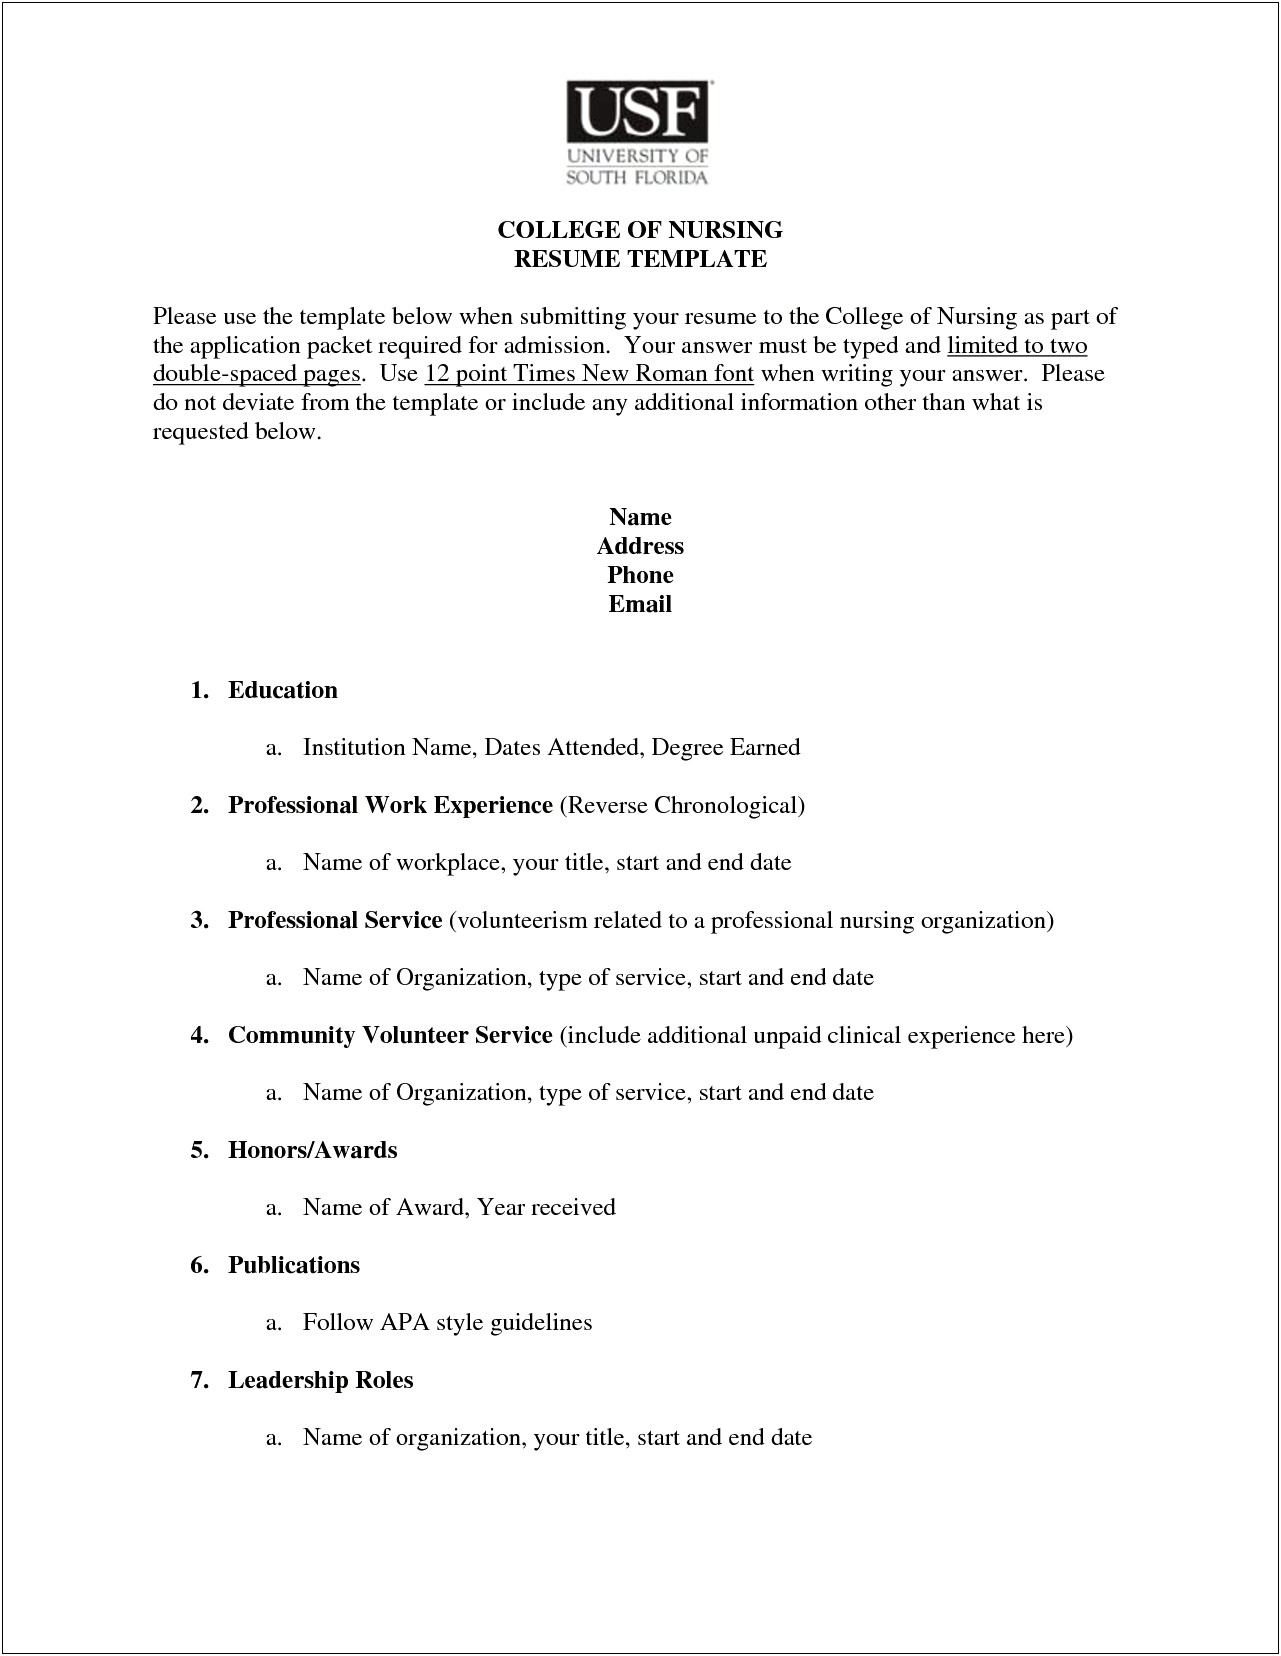 Sample Of College Resume Application